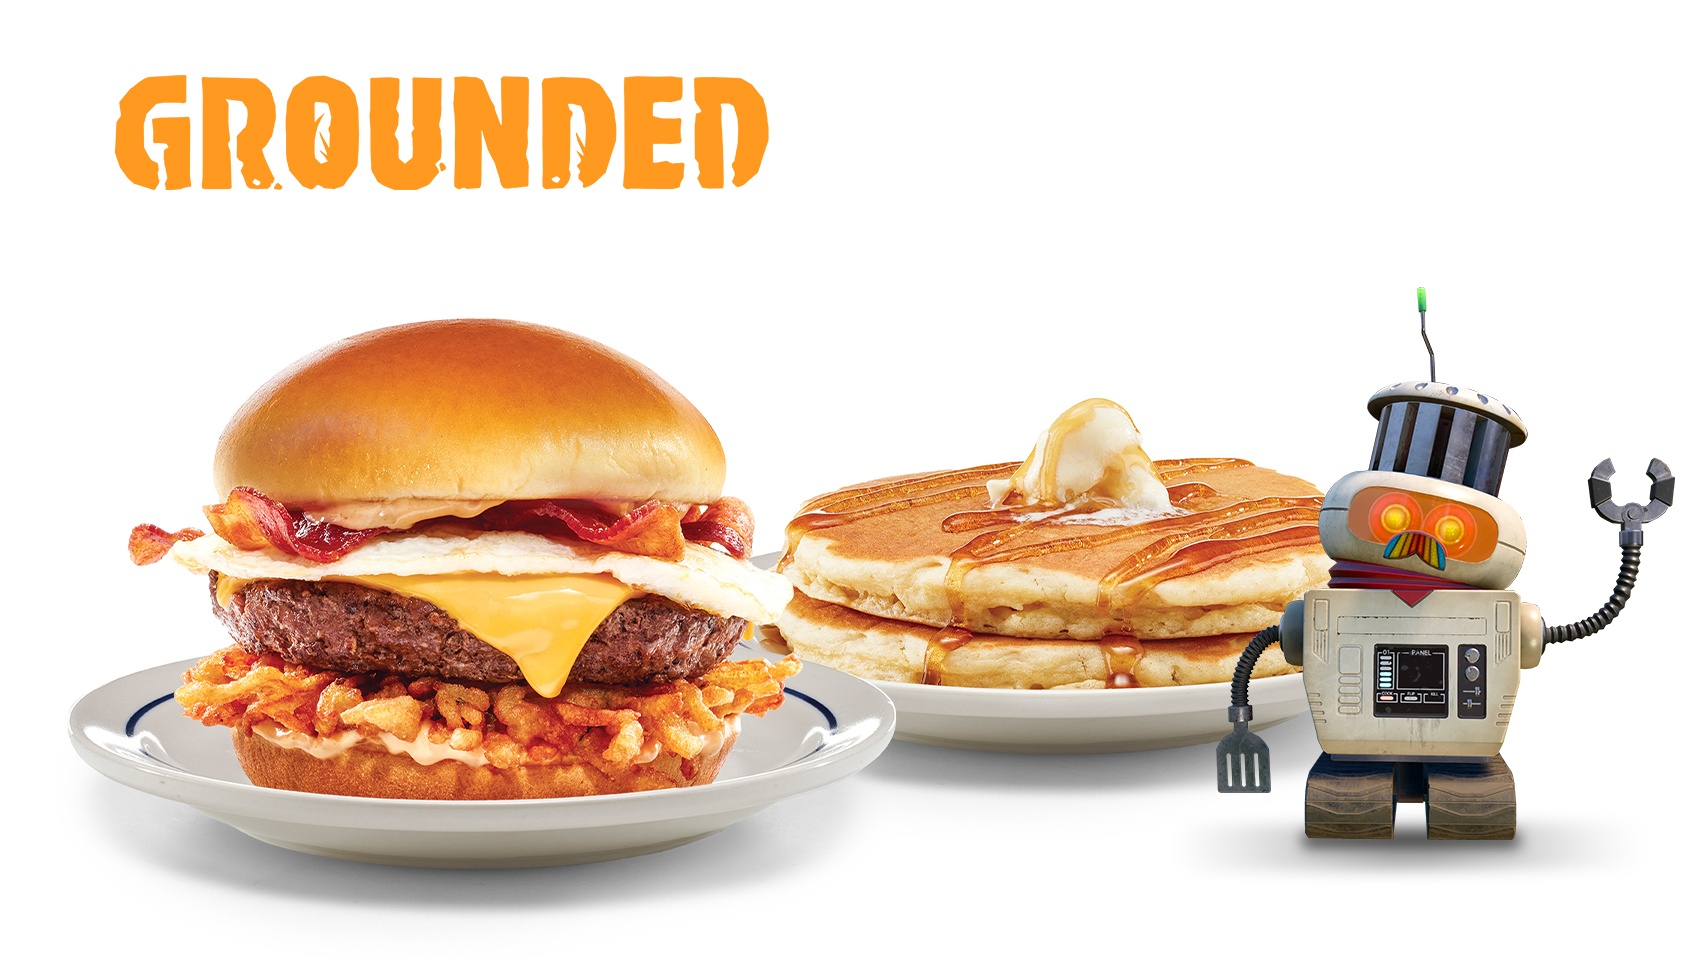 Grounded Burger Banner Image